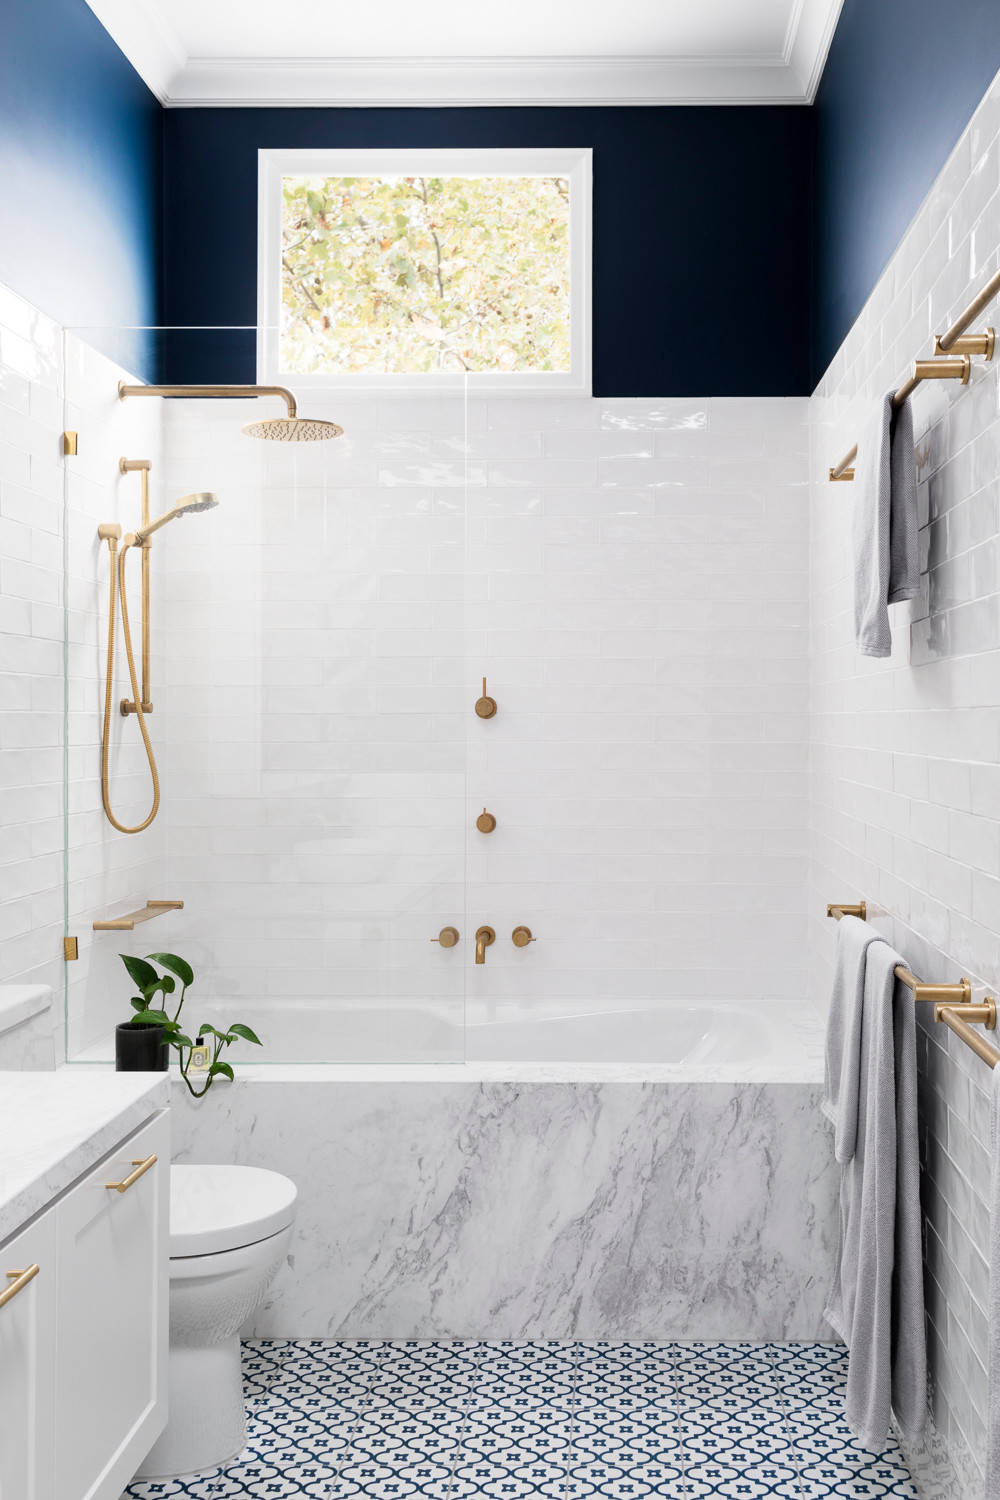 How To Choose Tiles For A Small, What Size Tiles Are Best For Small Bathrooms